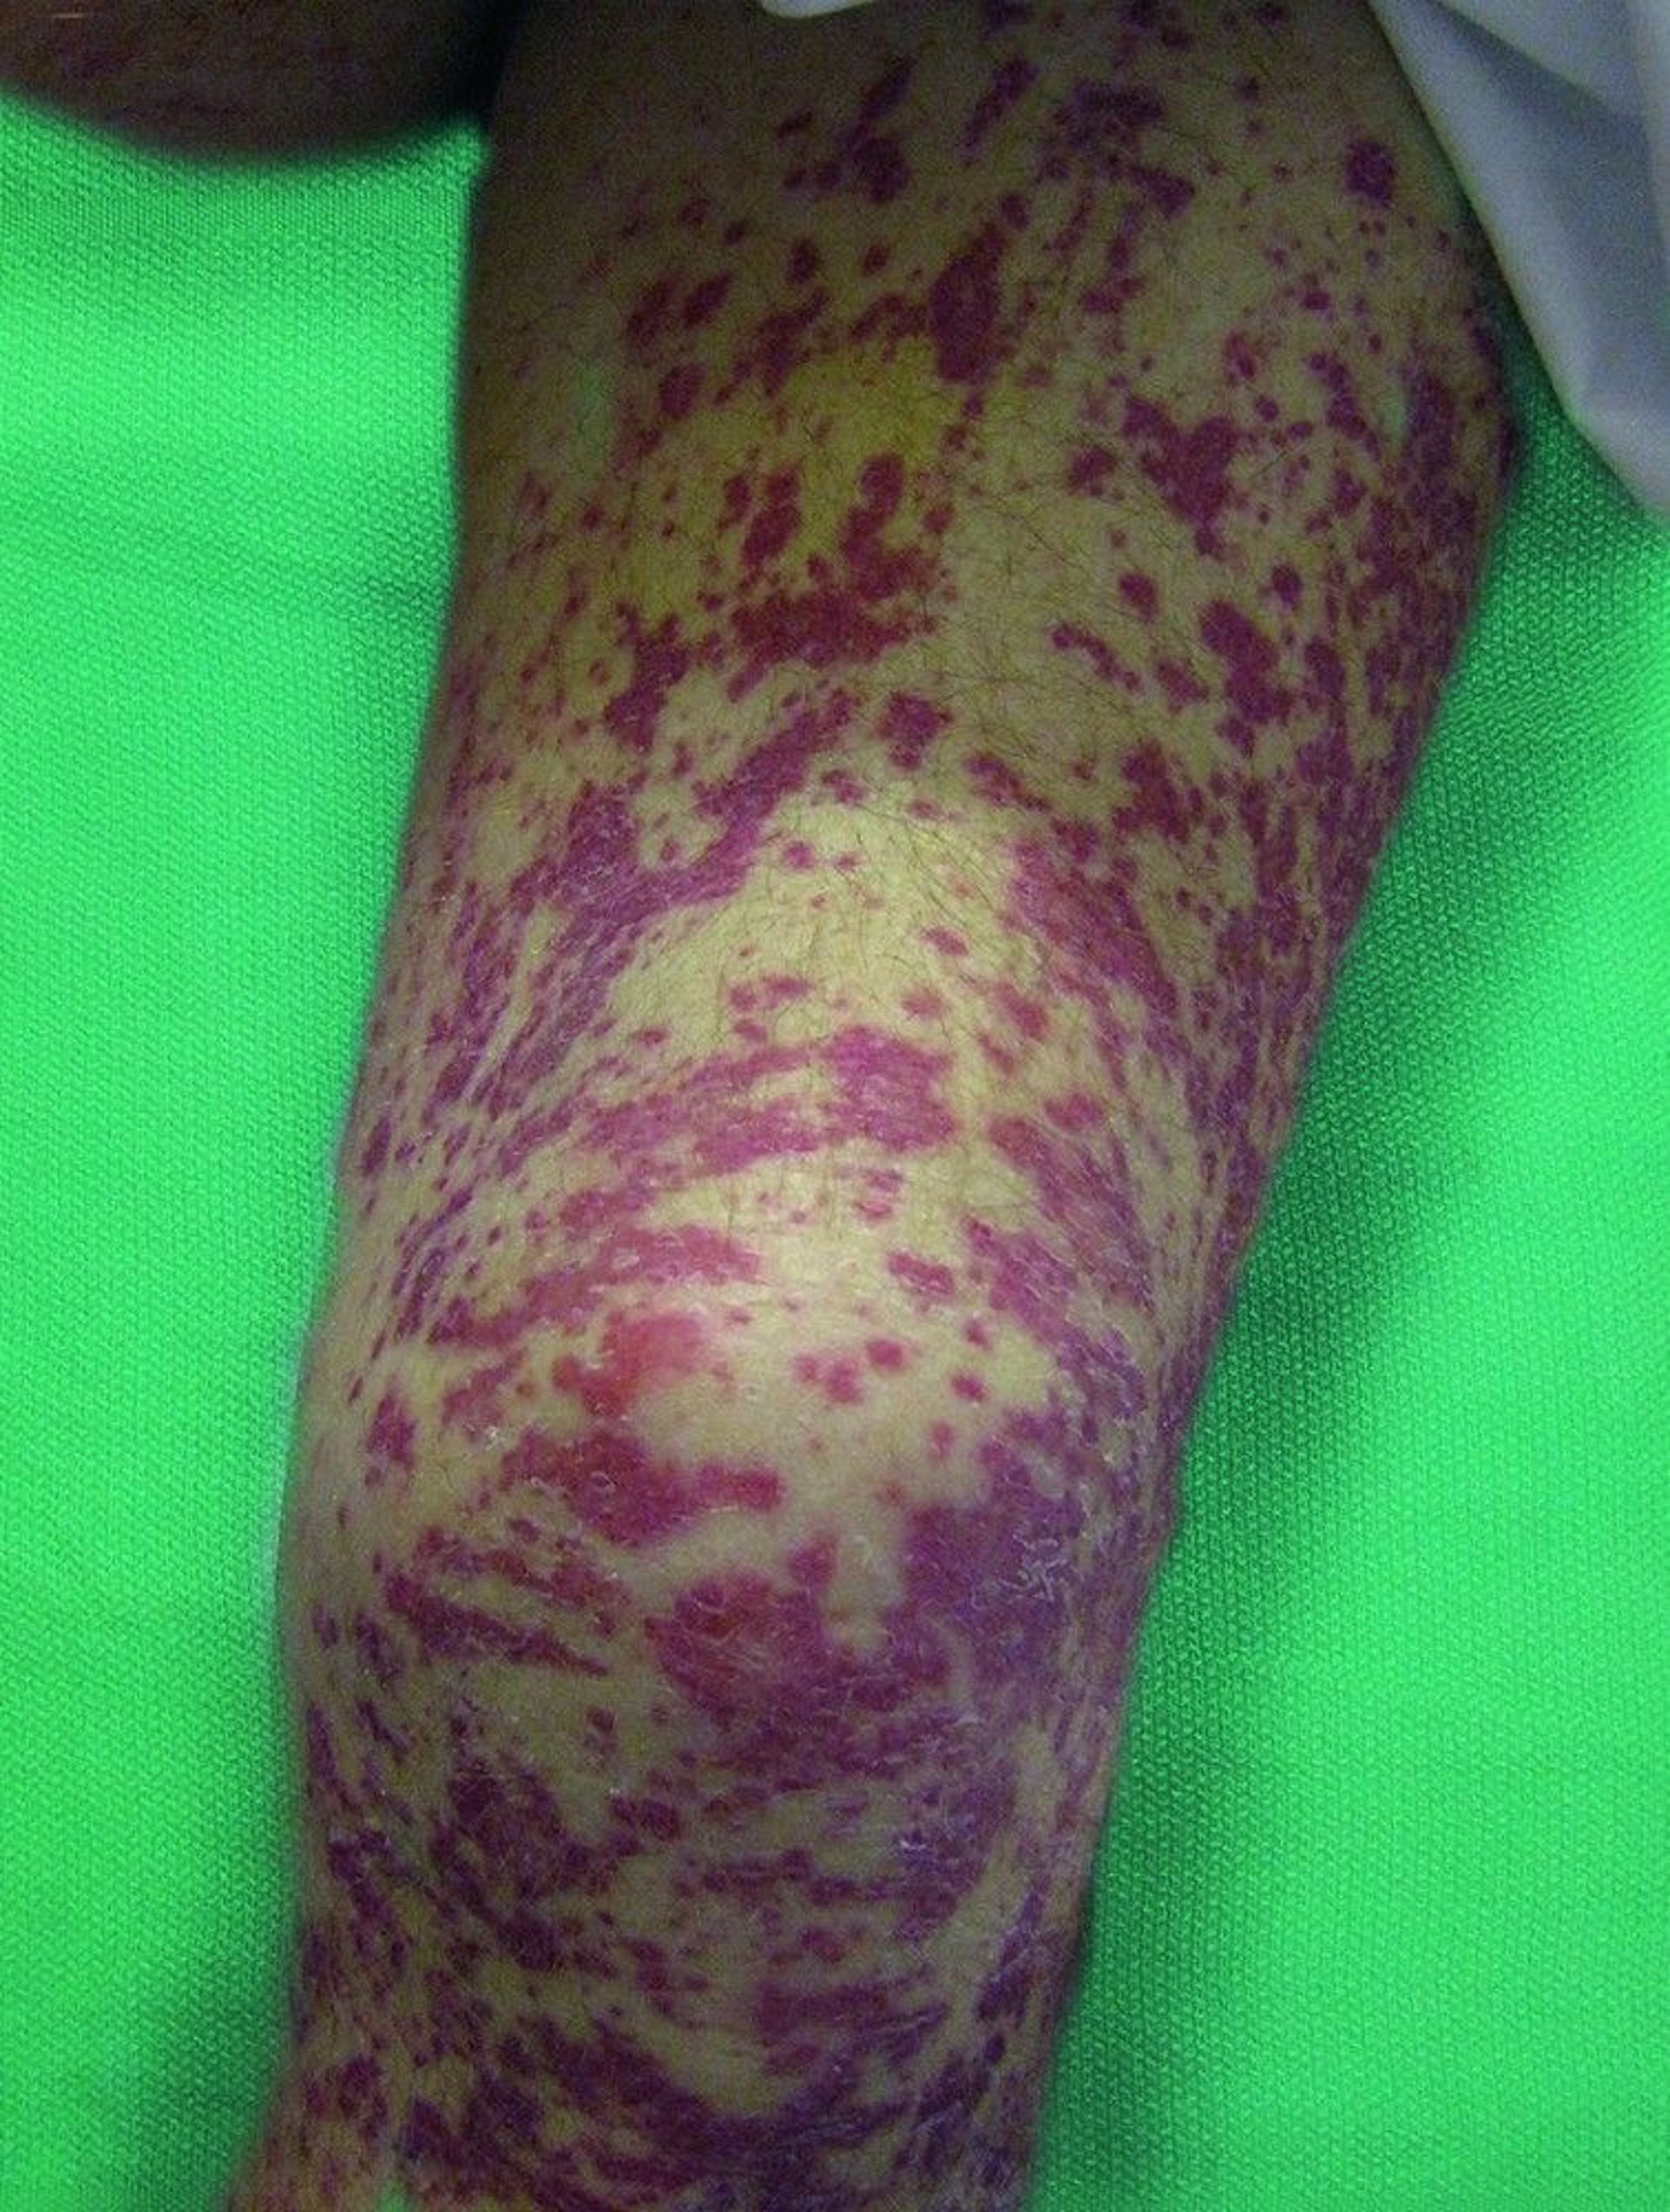 Cutaneous Vasculitis (Lower Extremity)